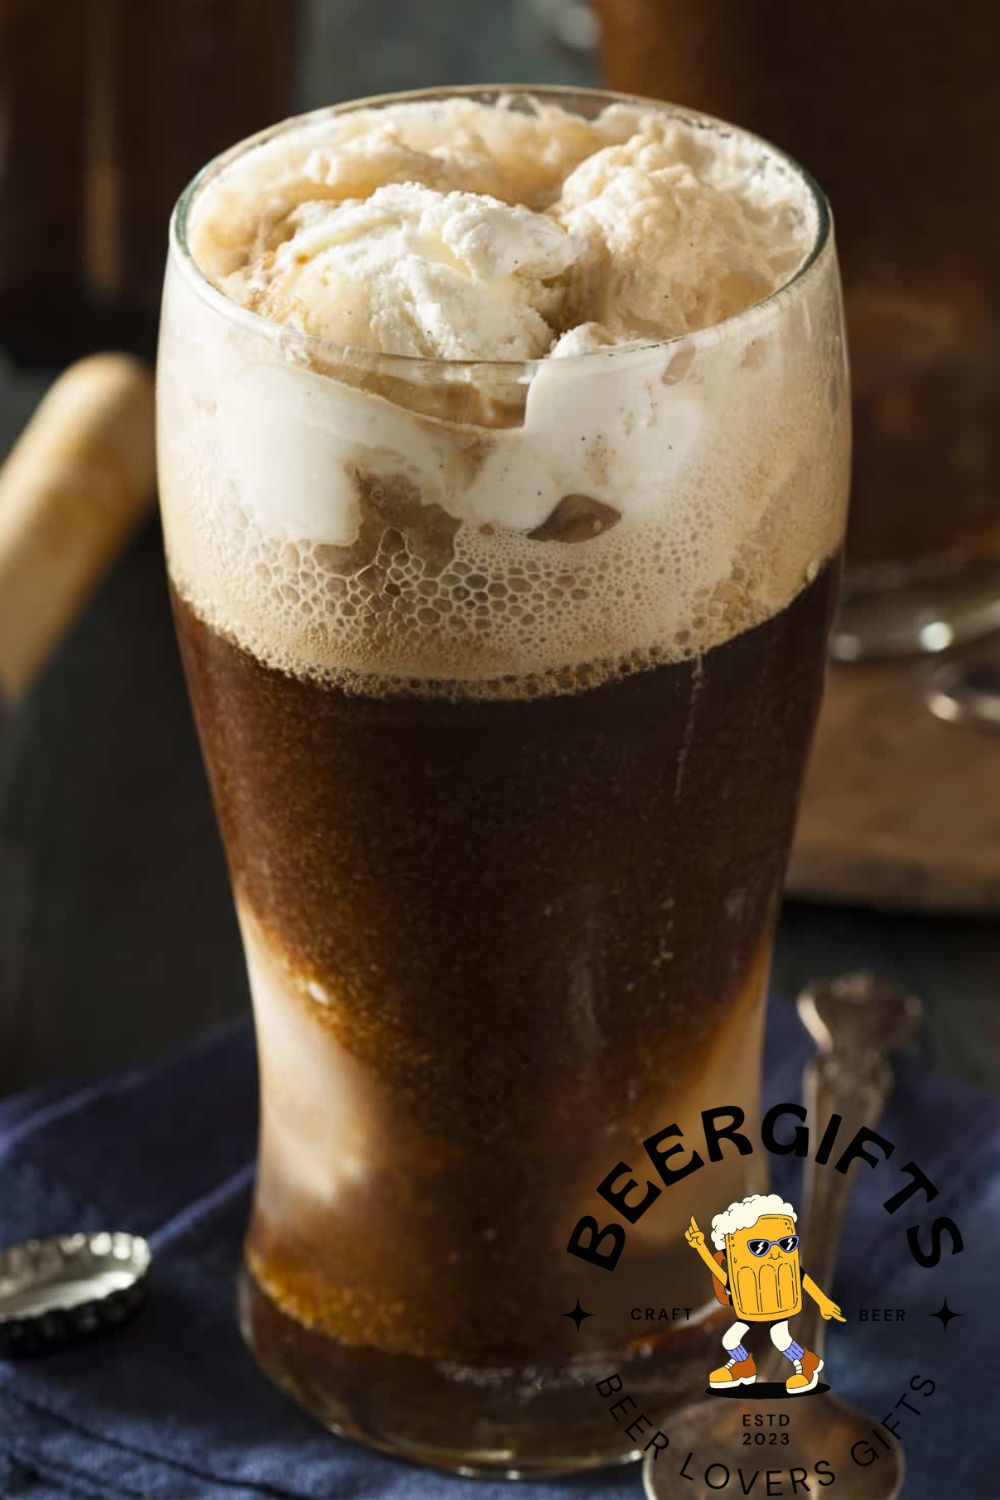 Root Beer Everything You Need to Know6